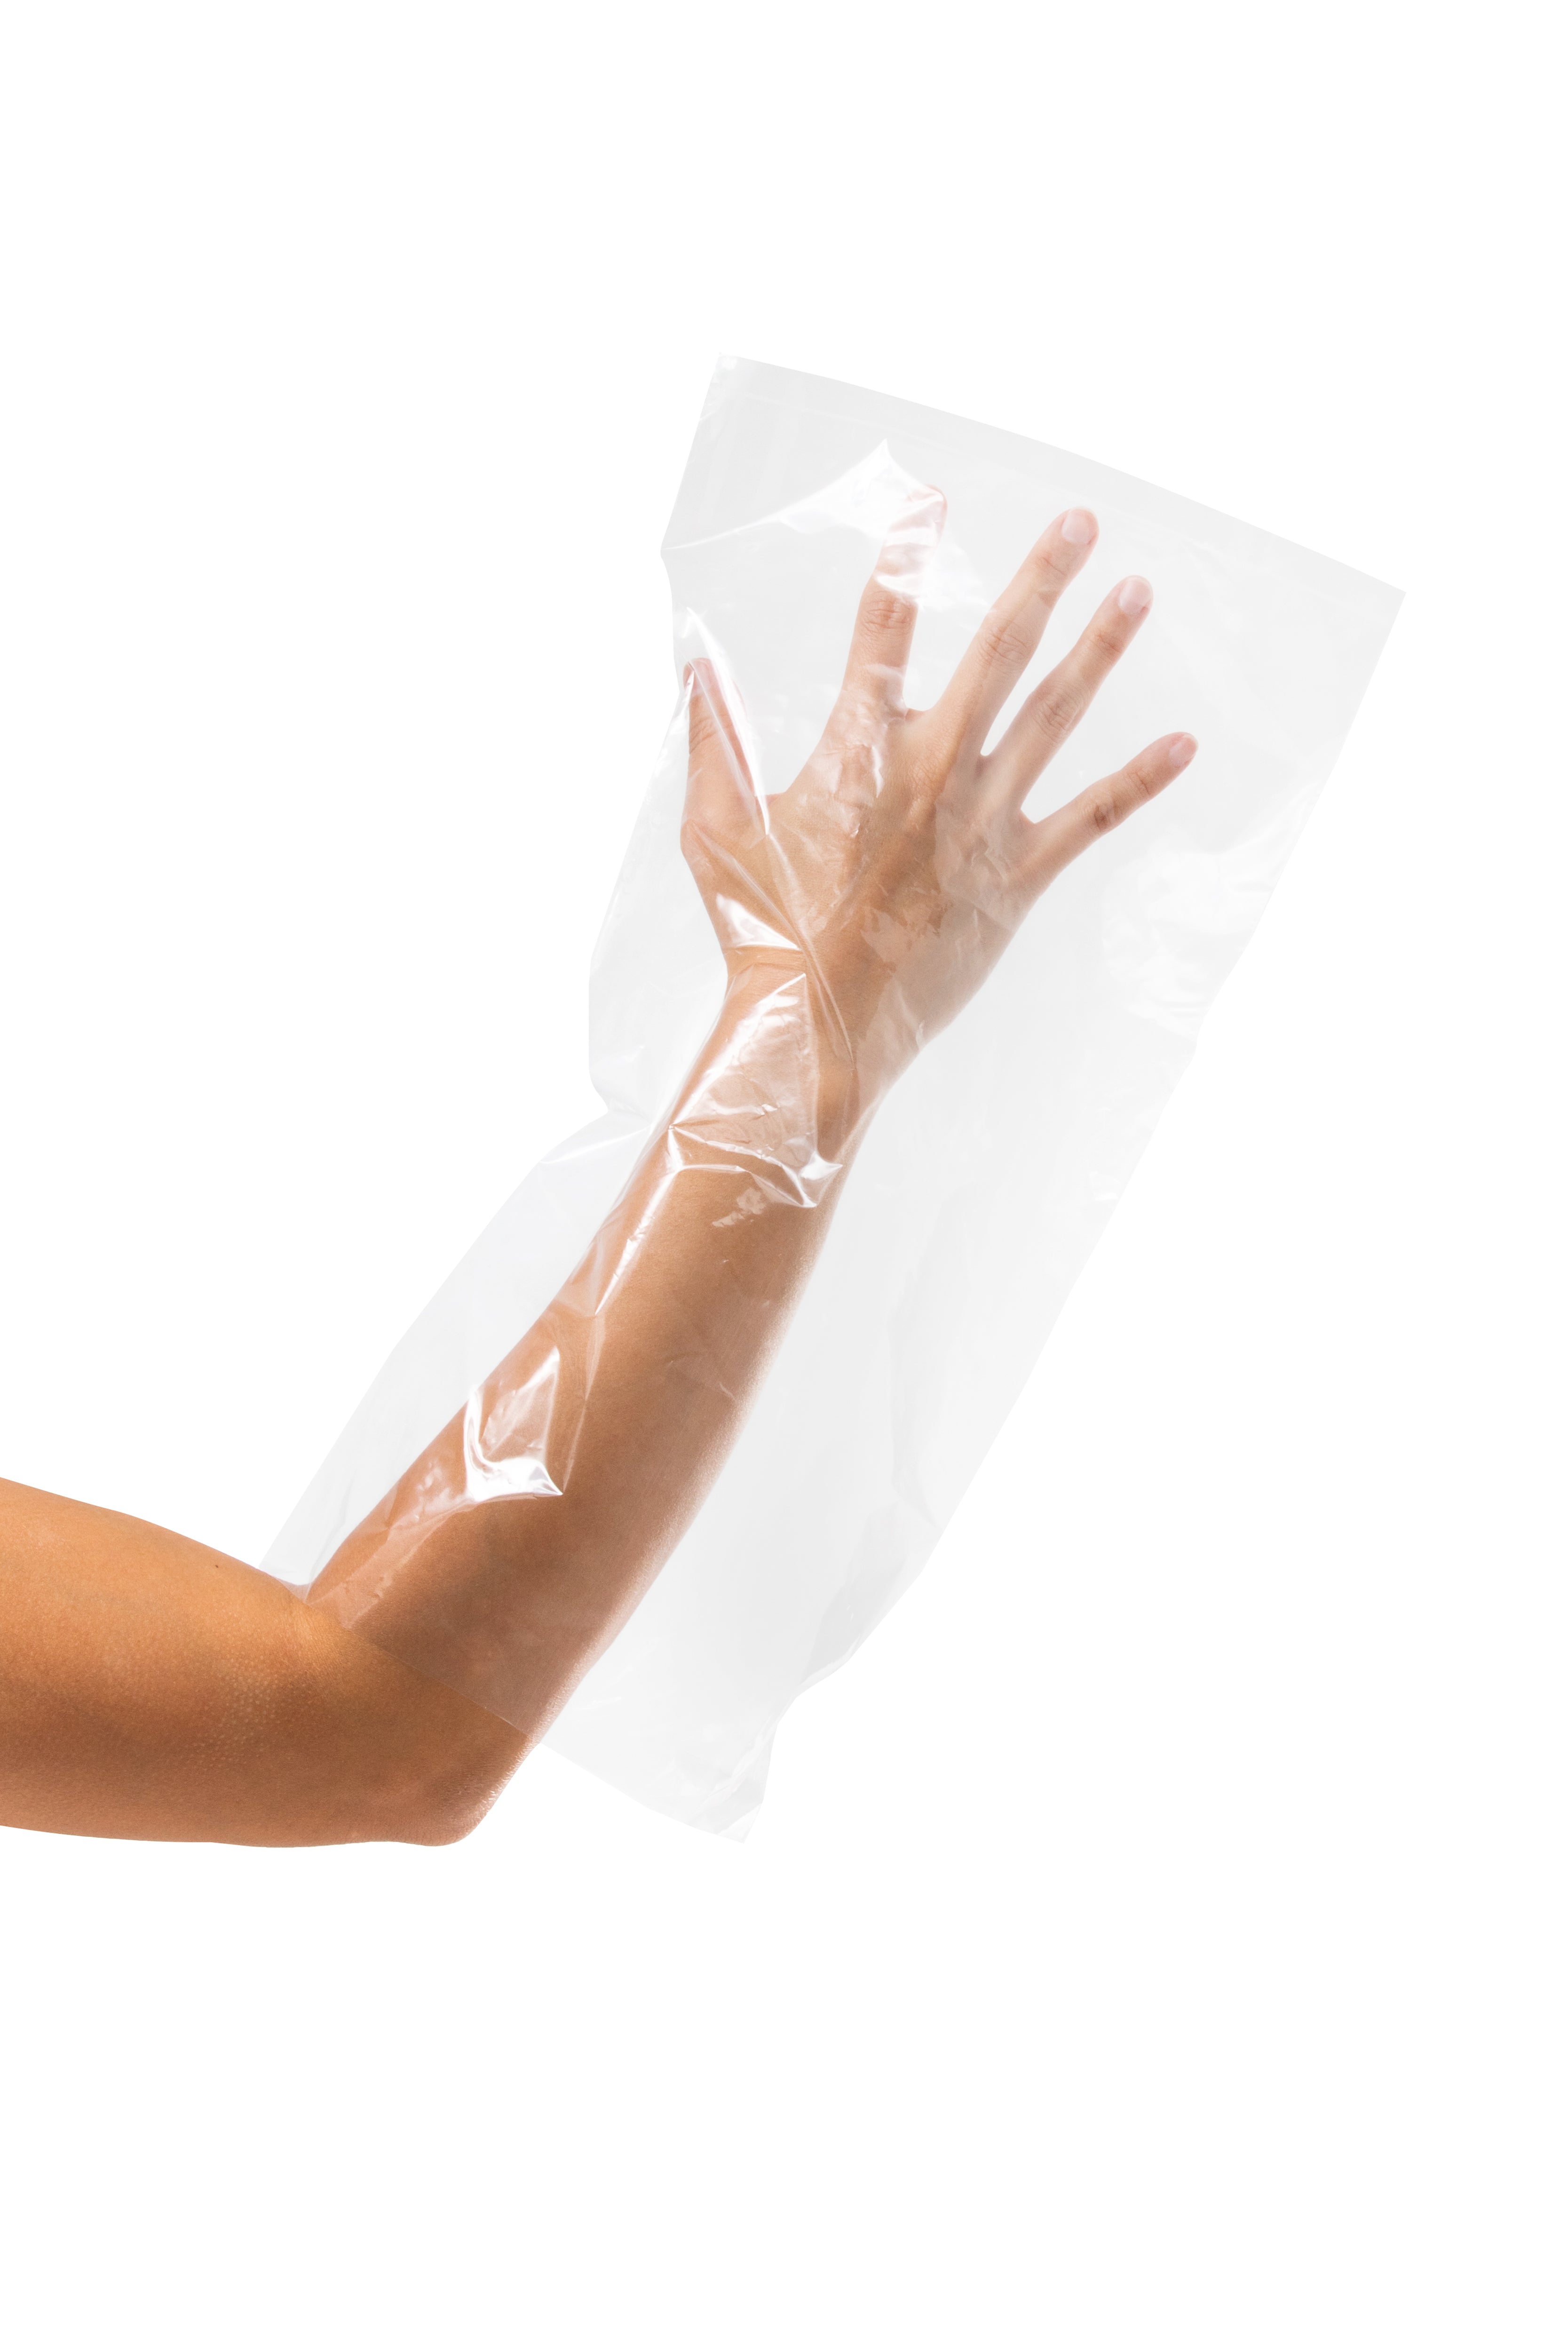 Disposable hand and foot liners on a hand